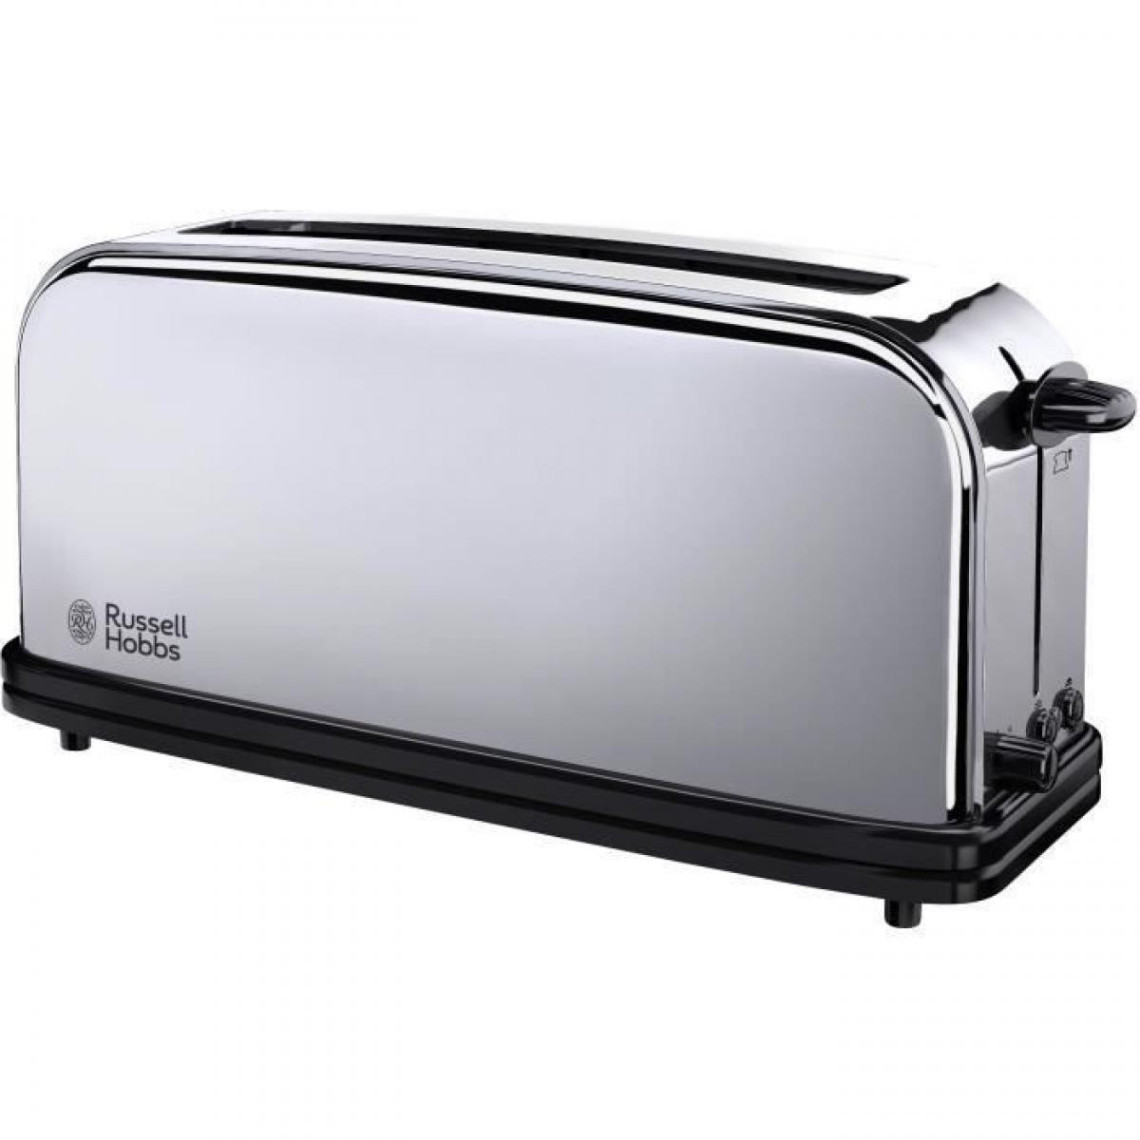 Russell Hobbs RUSSELL HOBBS 23510-56 Grille pain Victory Longue fente Design Rétro 1000W - Inox